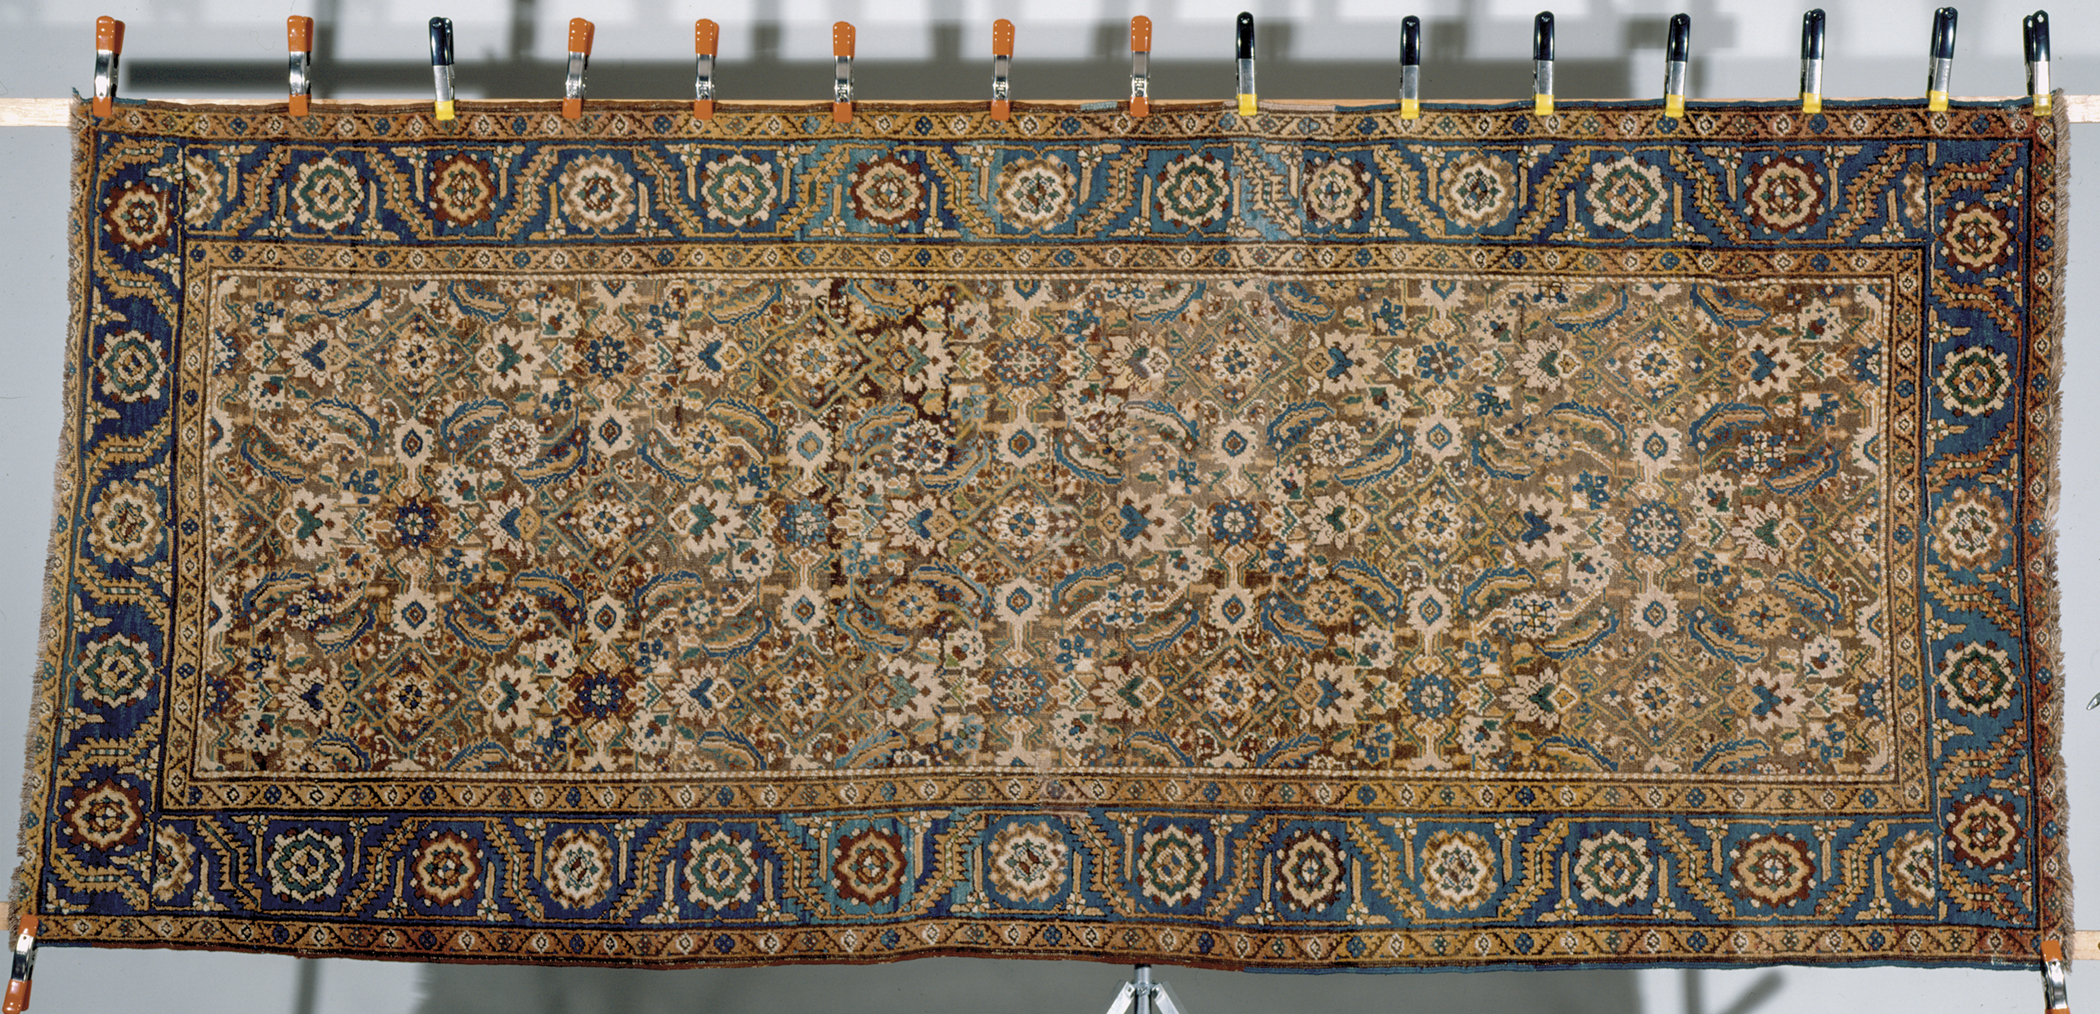 1952.0040 Rug, view 1